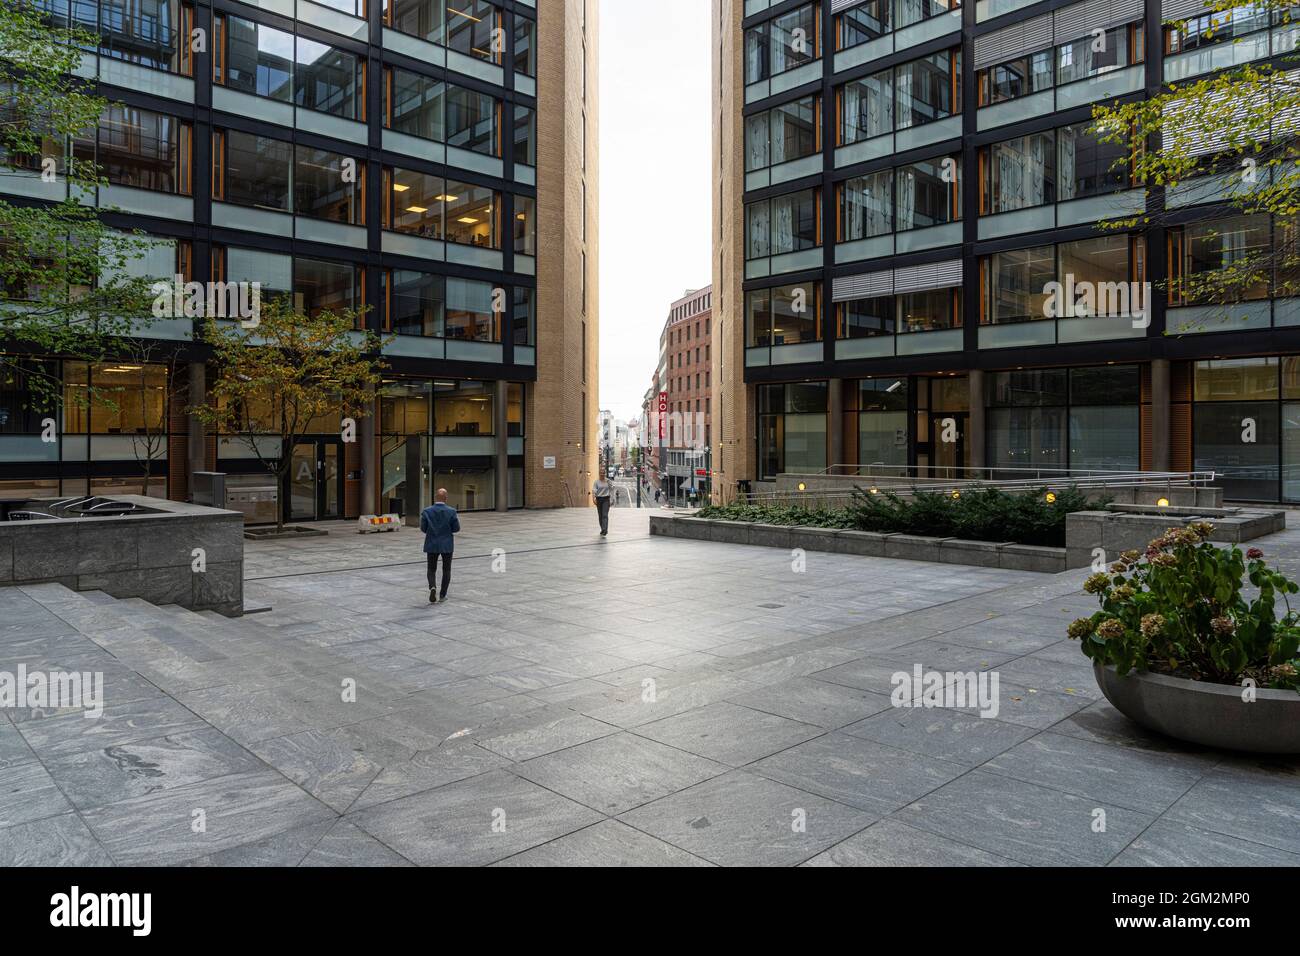 Oslo, Norway. September 2021. view of the passage between modern buildings in the city center Stock Photo